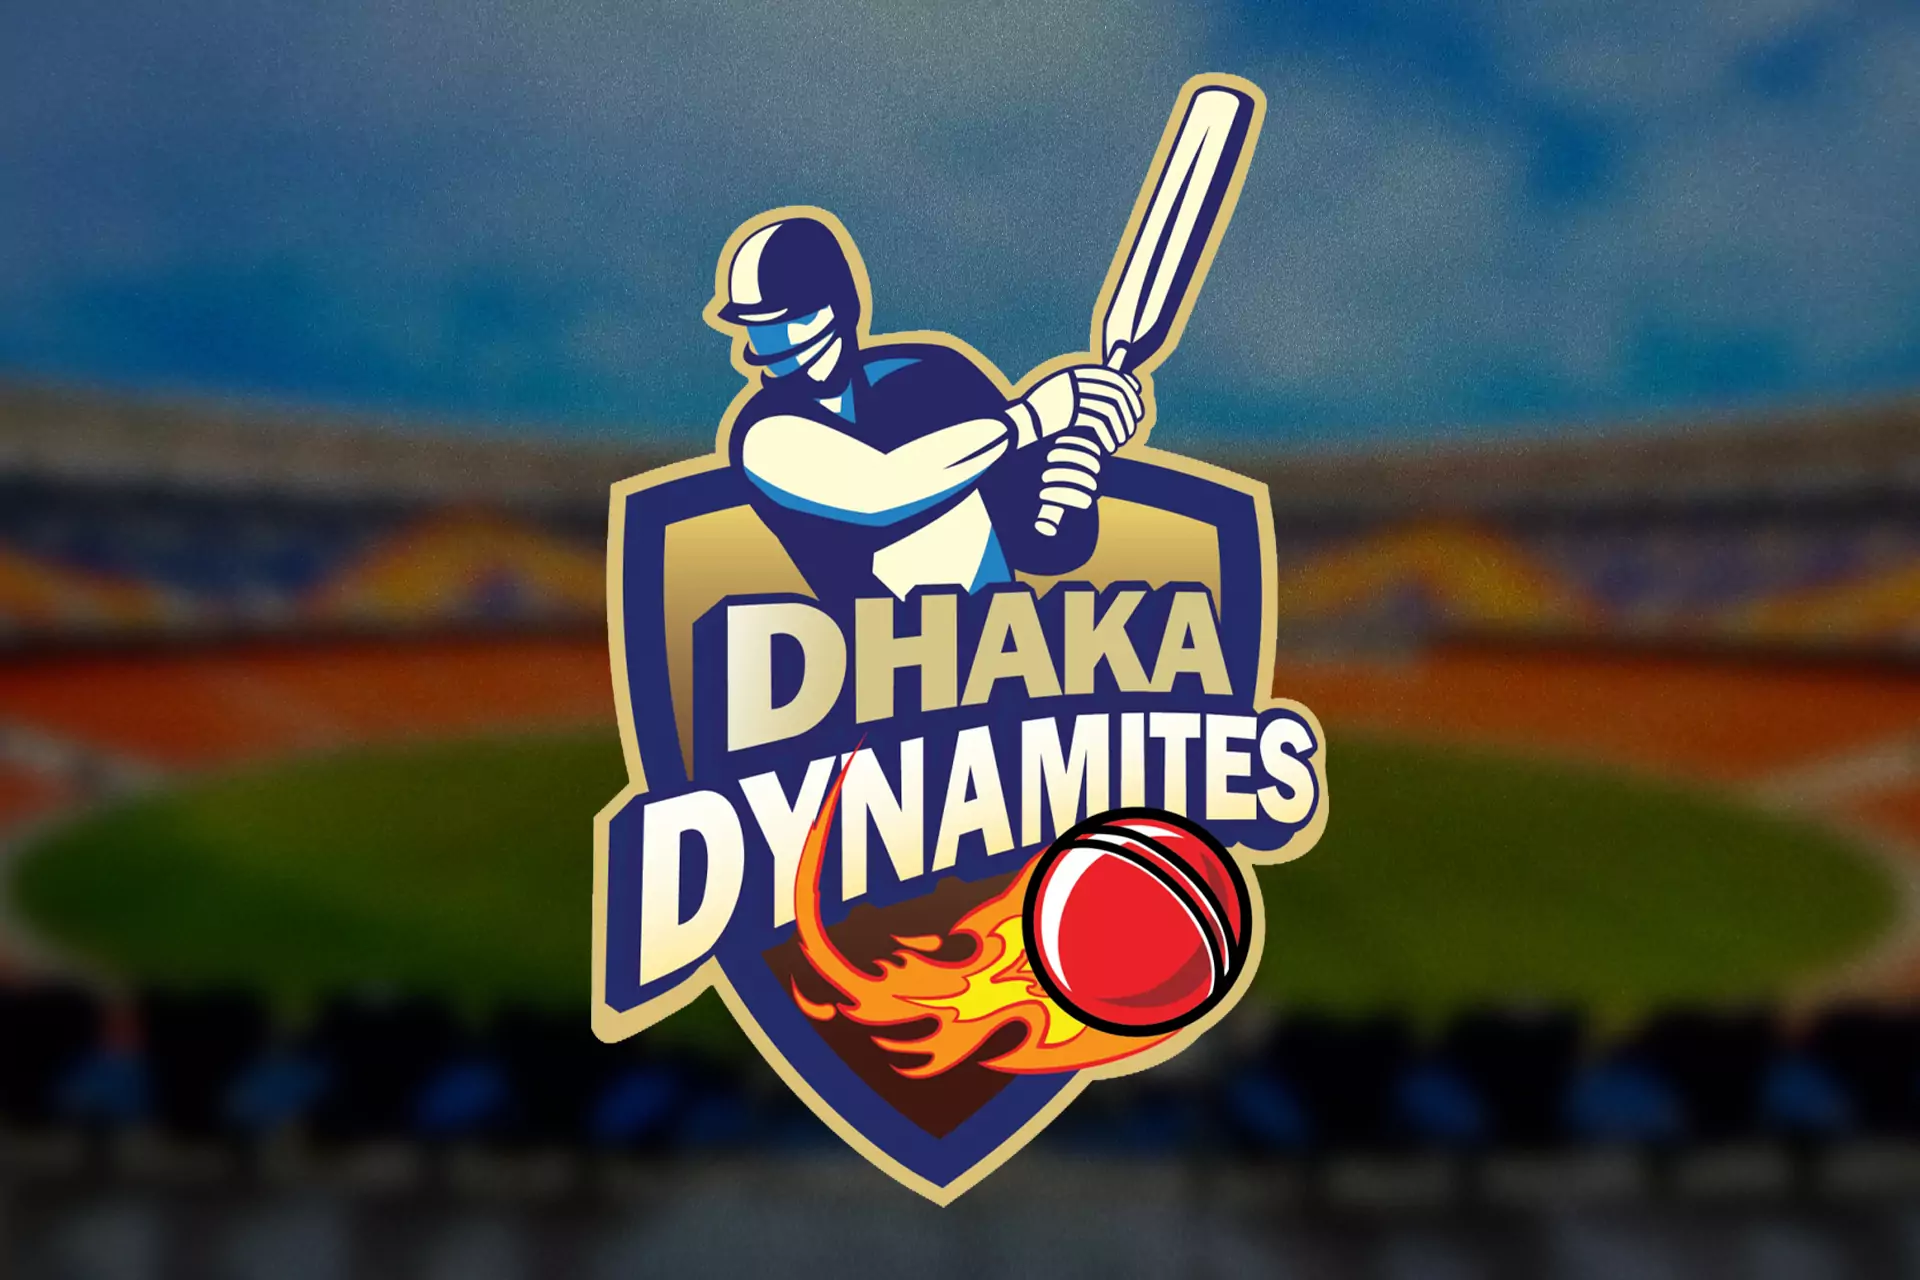 The Dhaka Dynamites have already been winners of the BPL twice.